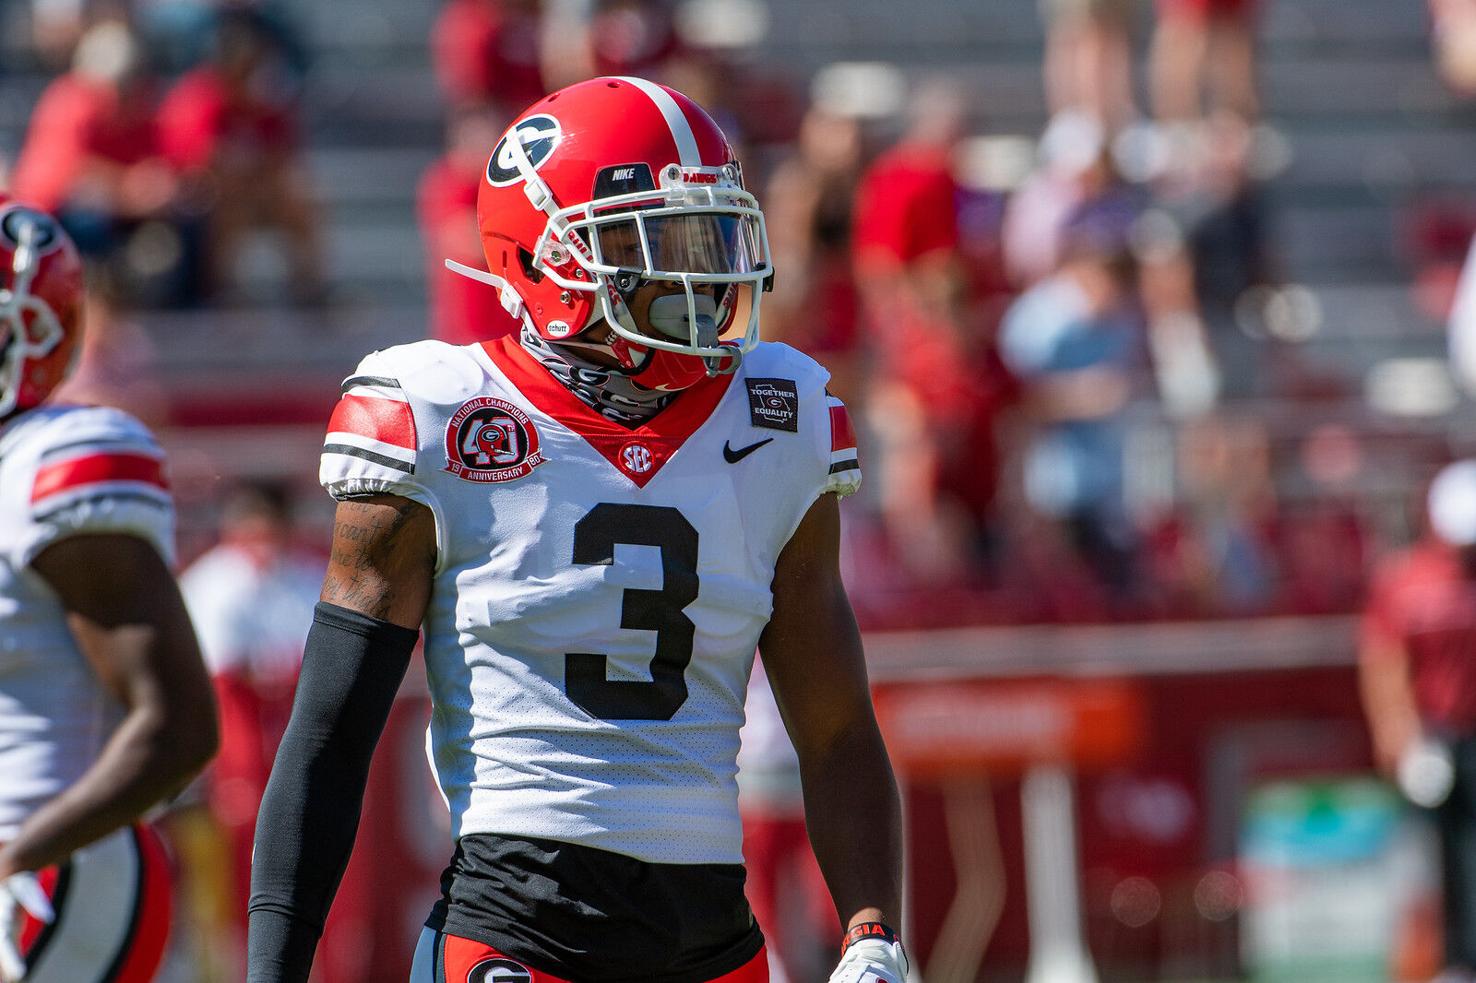 Tyson Campbell selected 33rd overall by the Jaguars in NFL